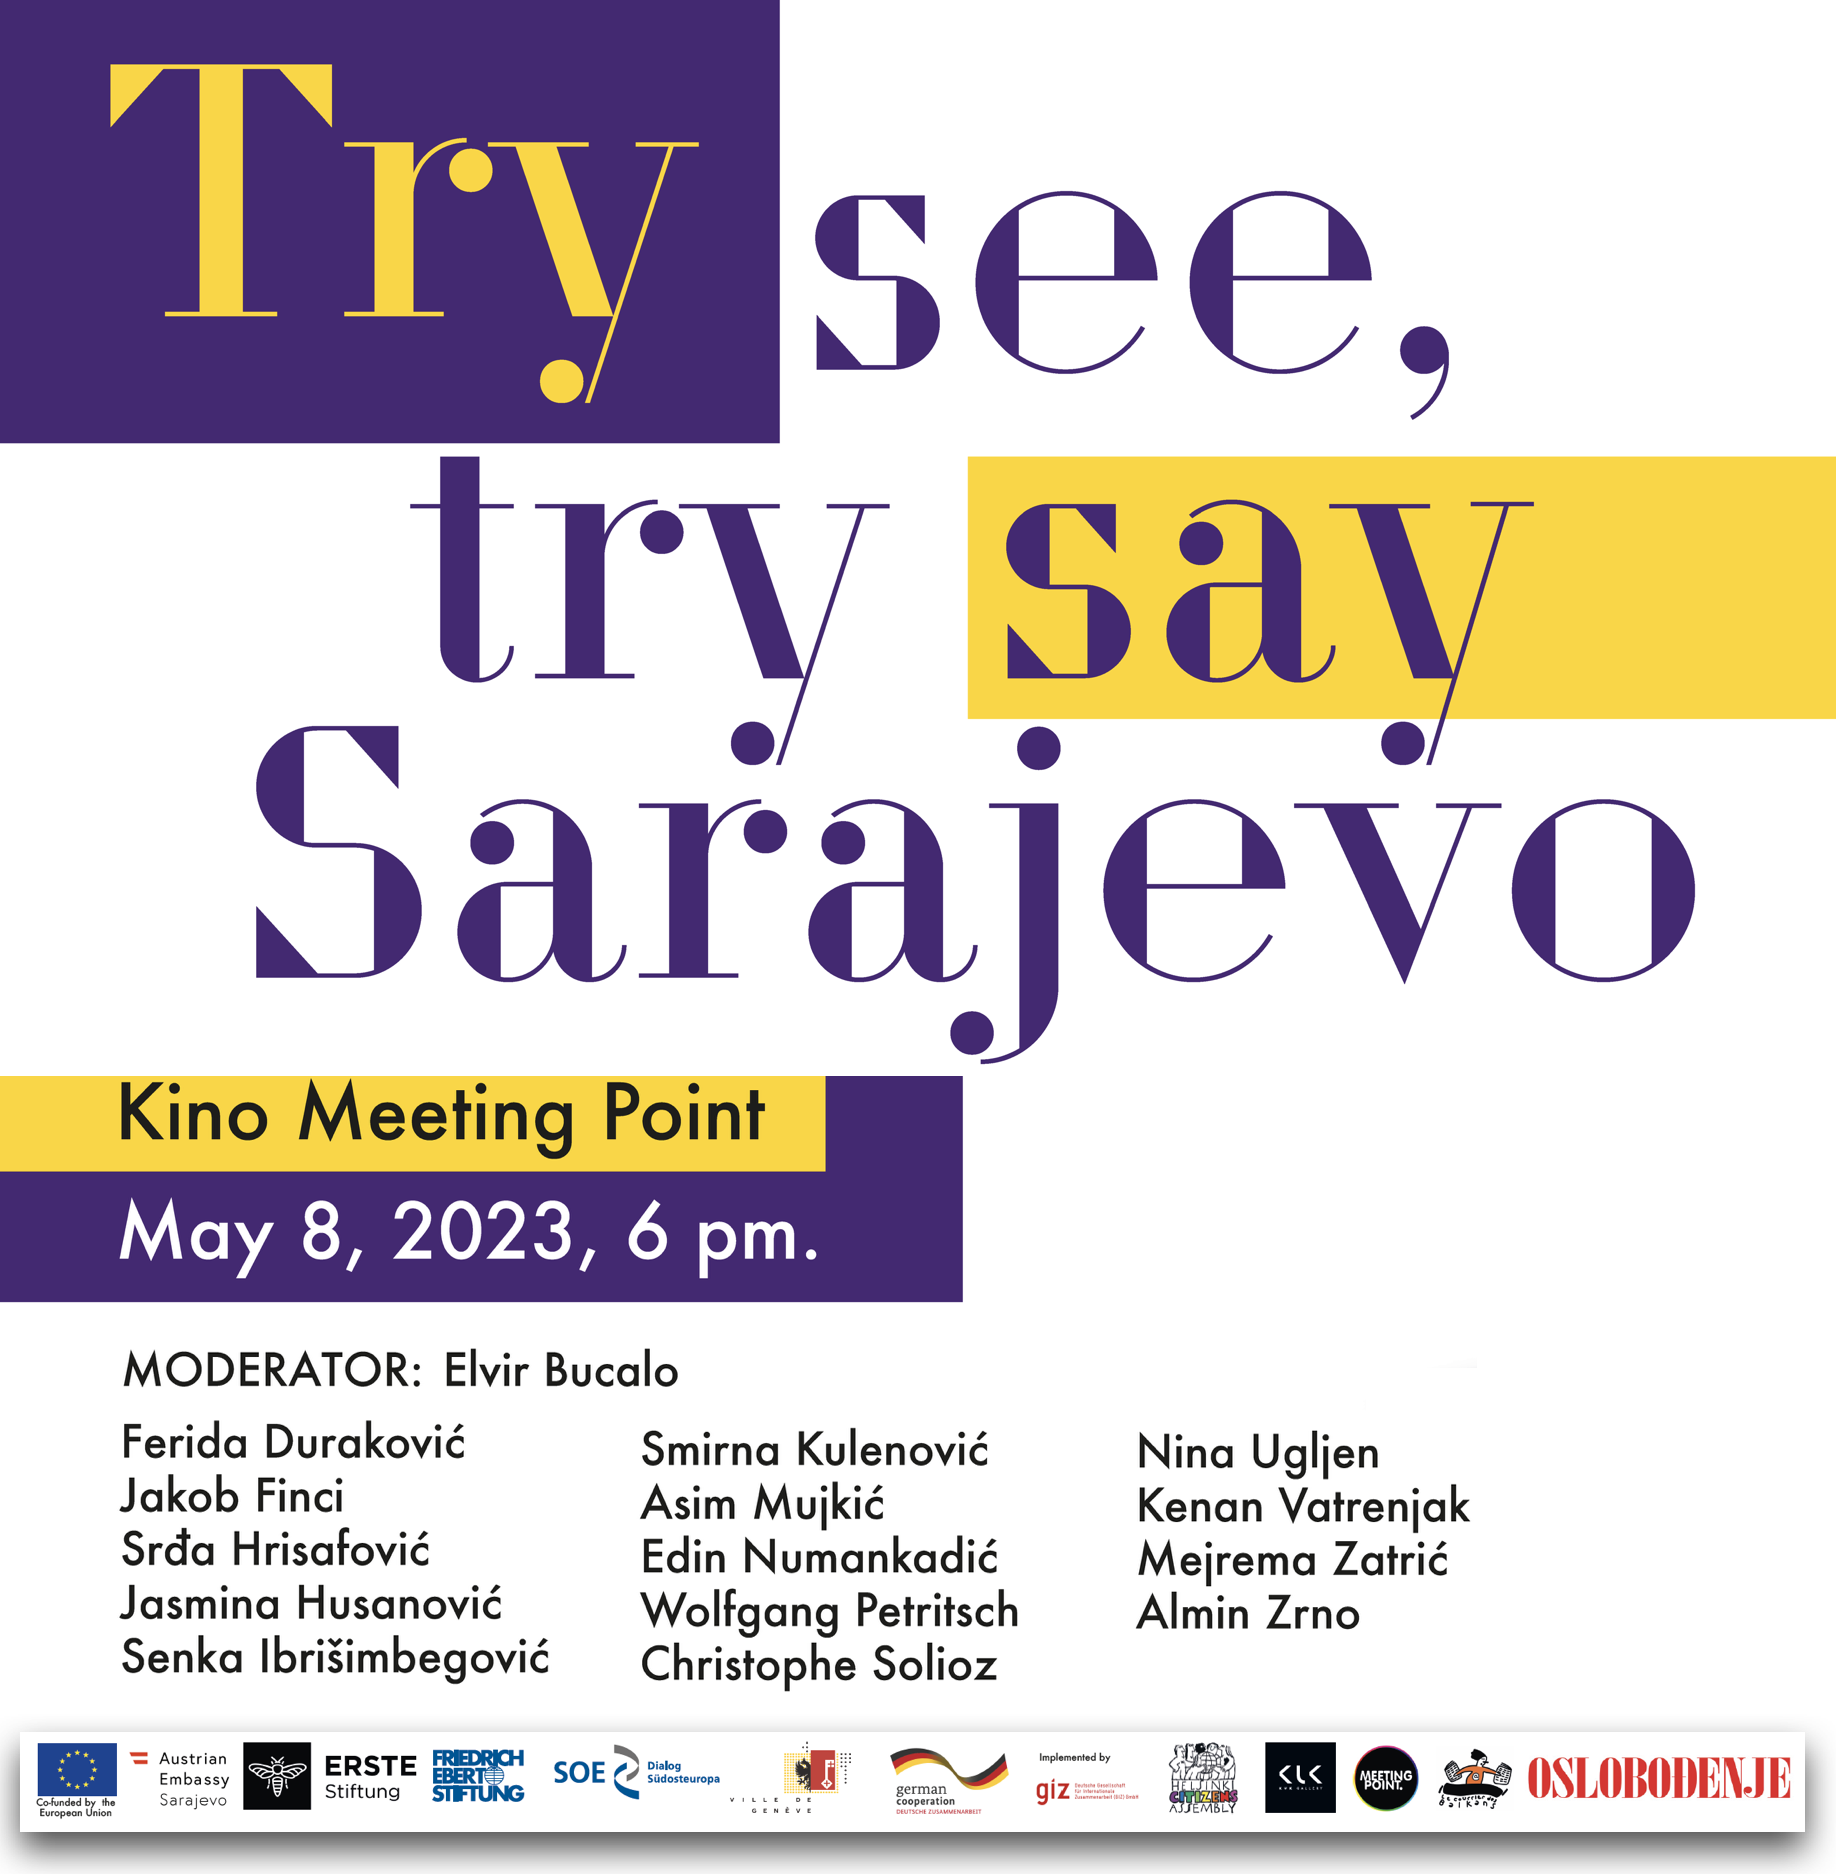 Try See Try Say Sarajevo